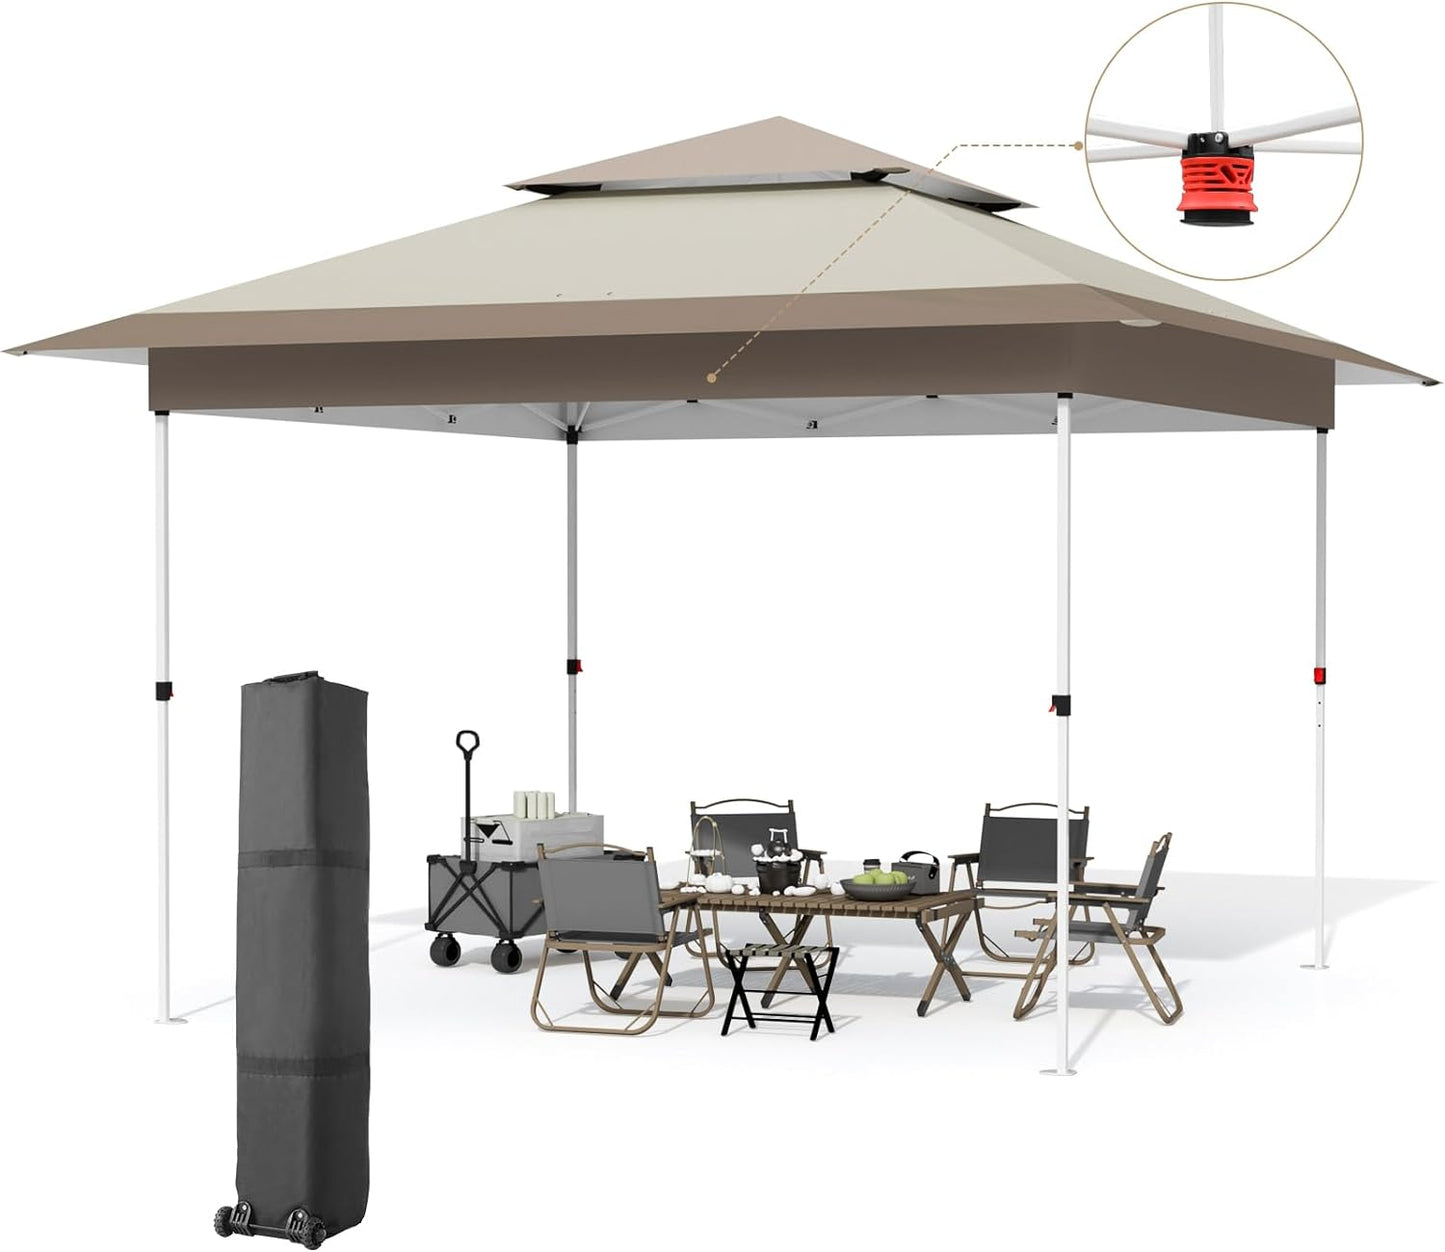 Arlopu 12x12 Easy Set-up Canopy Tent, Instant Outdoor Straight Leg Canopy with Auto Extending Eaves, One Person Folding Commercial Shelter with Upgraded Wheeled Bag, 144 sq.ft Sun Shade